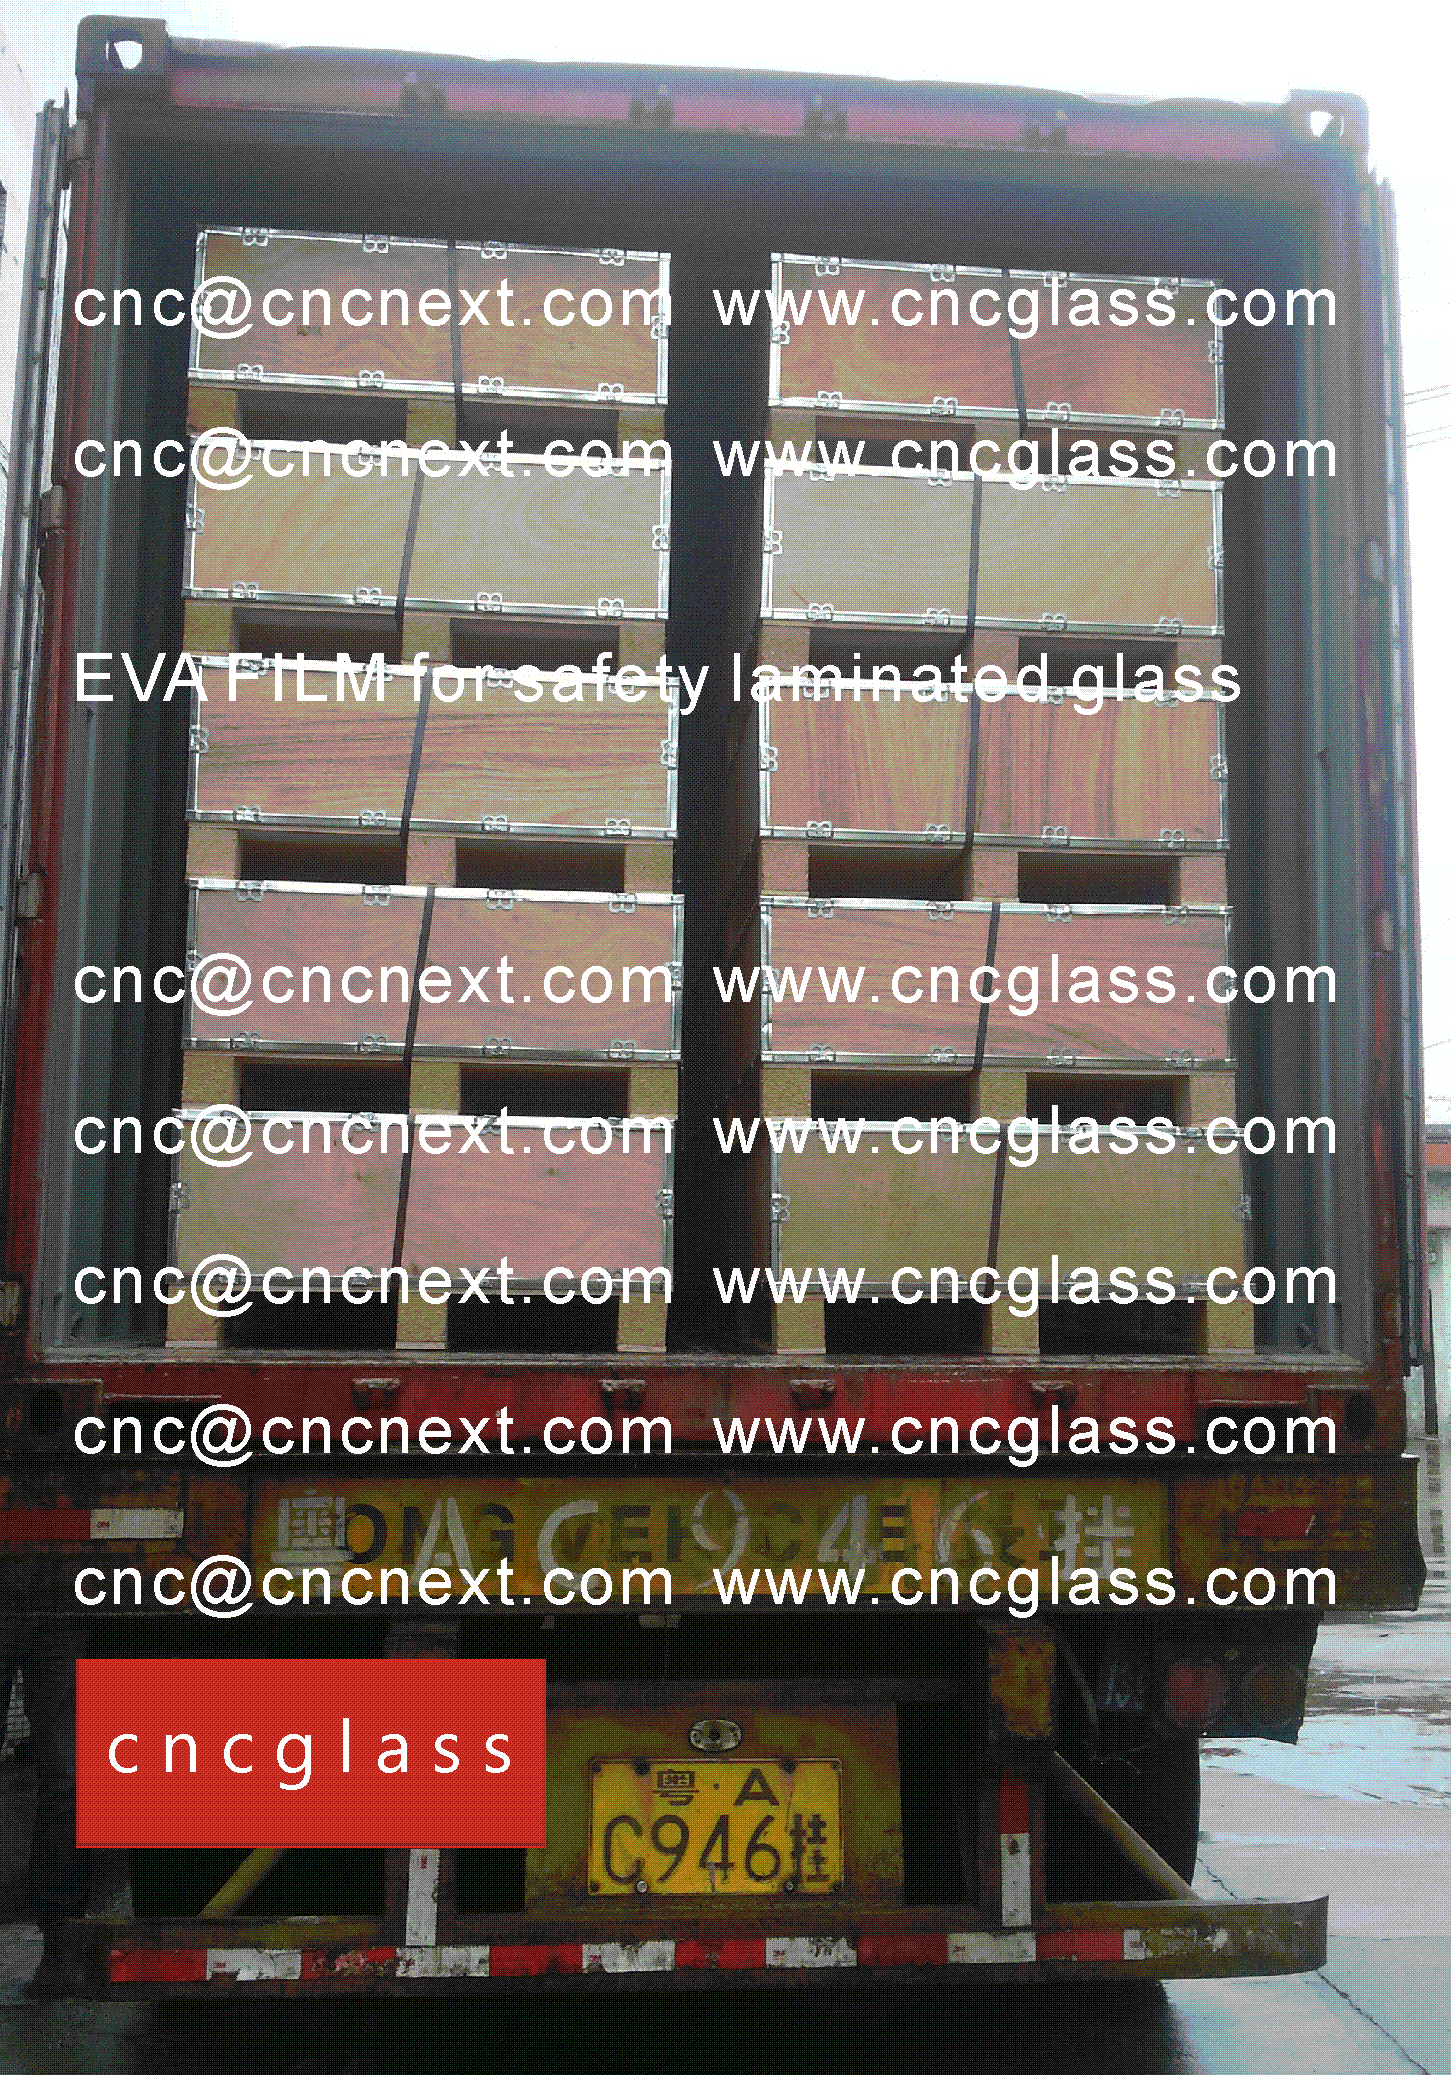 02 EVALAM INATING FILM LOADING CONTAINER (SAFETY LAMINATED GLASS)